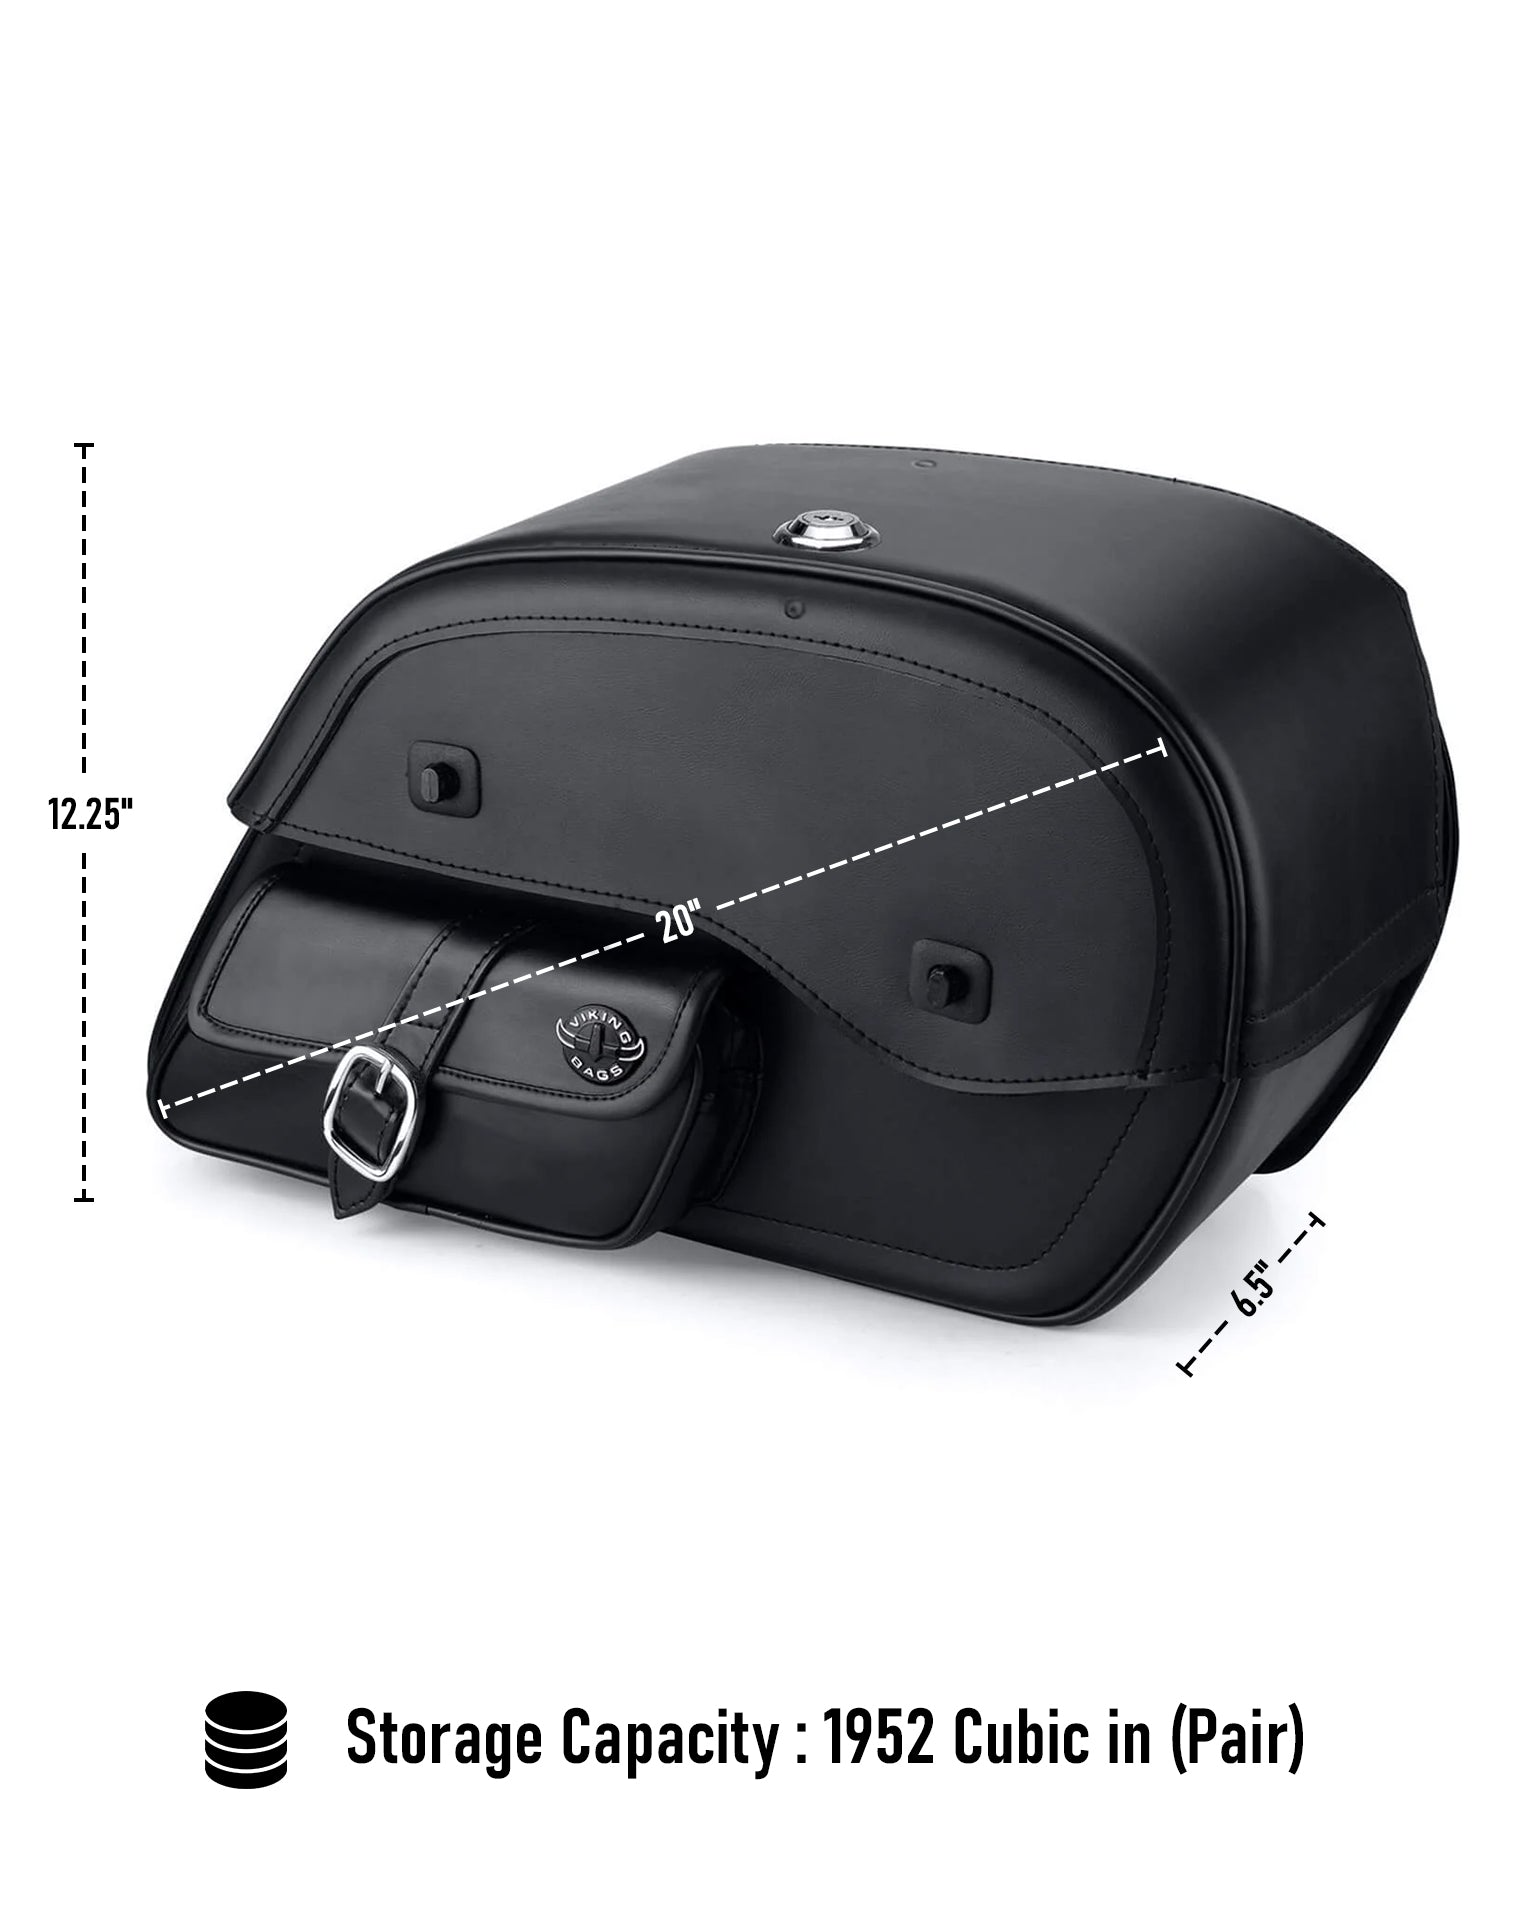 Viking Essential Side Pocket Large Leather Motorcycle Saddlebags For Harley Softail Sport Glide Flsb Can Store Your Ridings Gears